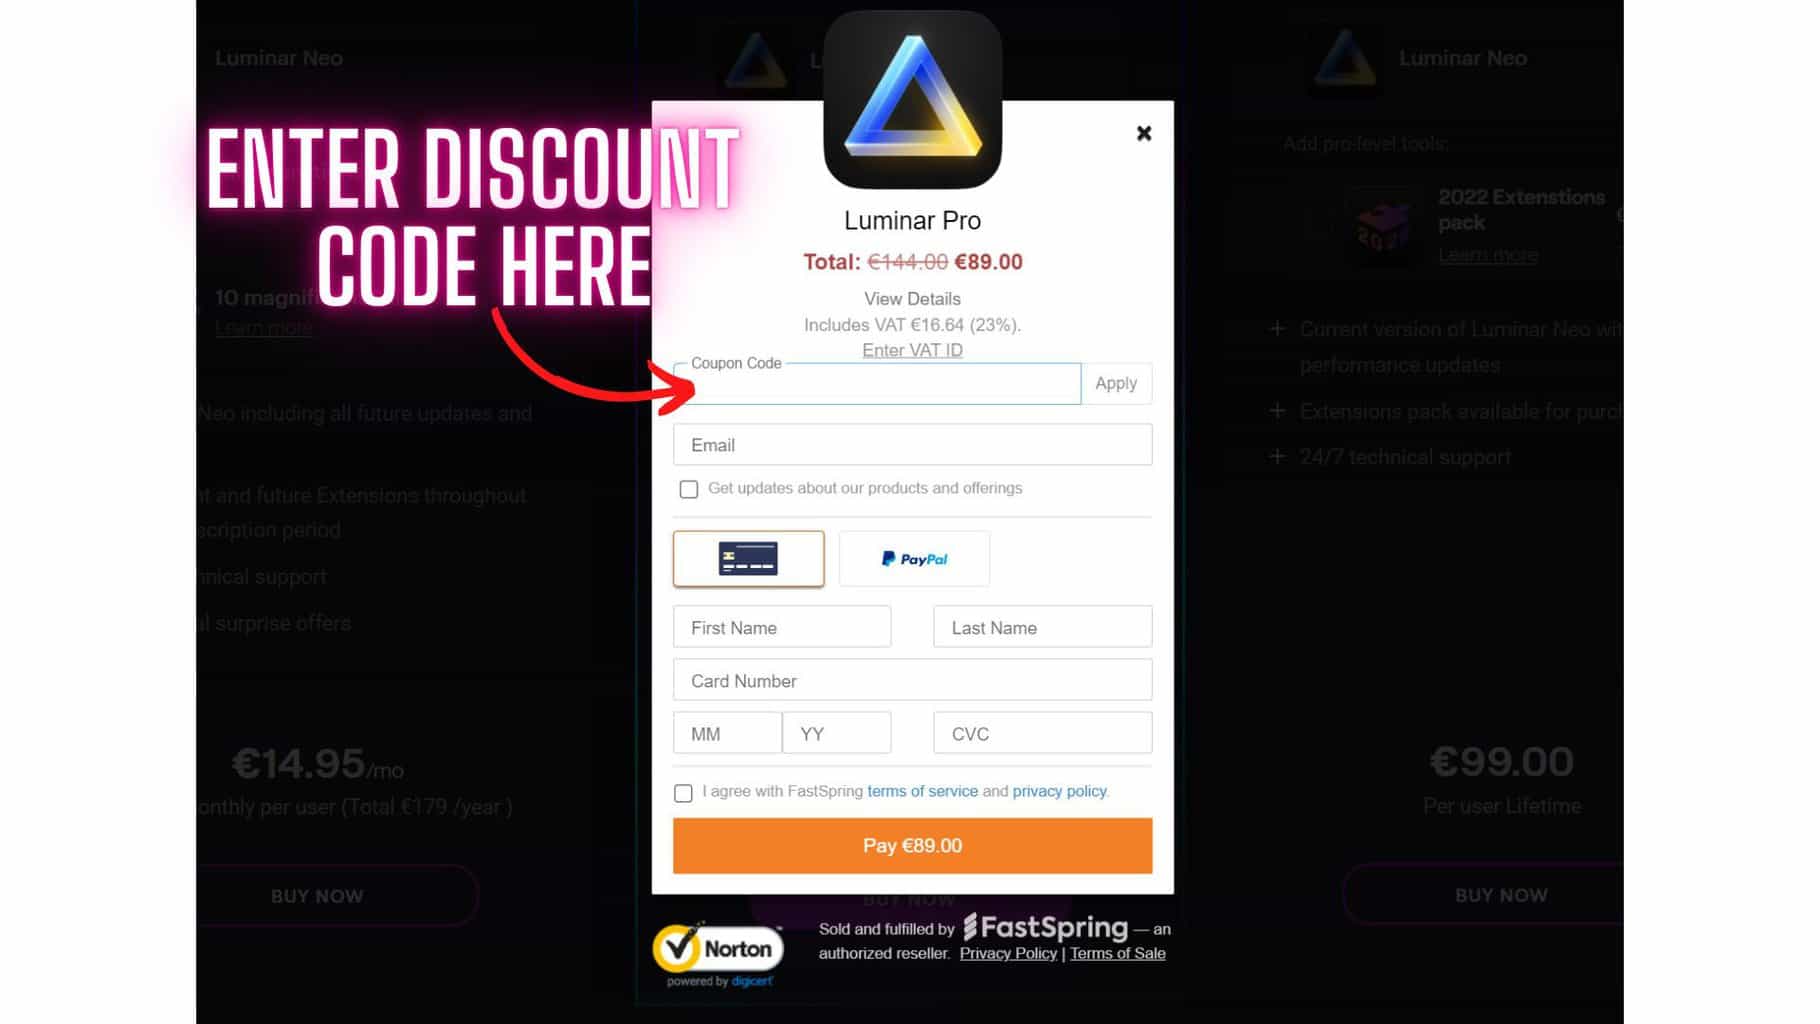 Luminar Neo discount code and how to enter it